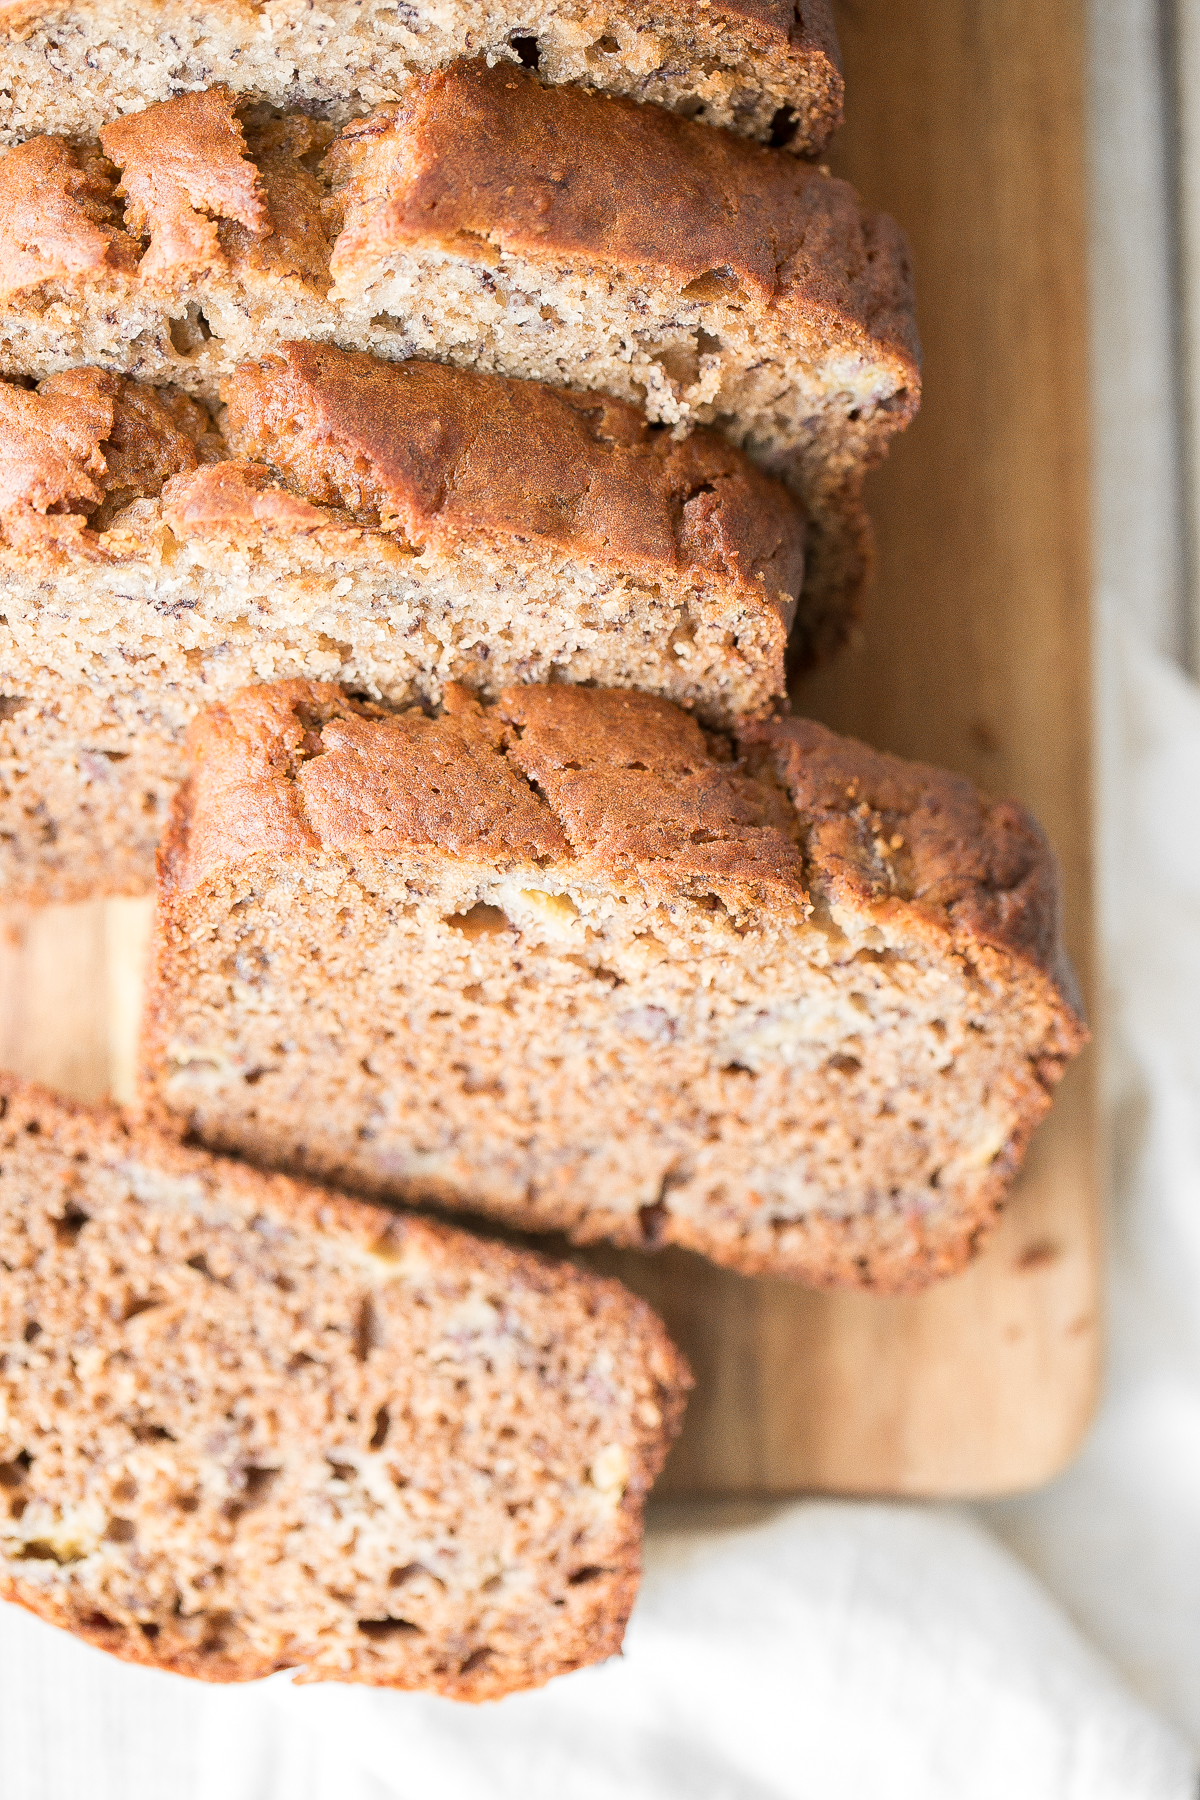 Healthy banana bread is delicious and moist and contains no refined sugar or butter. Quick and easy to make with 10 minutes prep and few pantry staples. | aheadofthyme.com